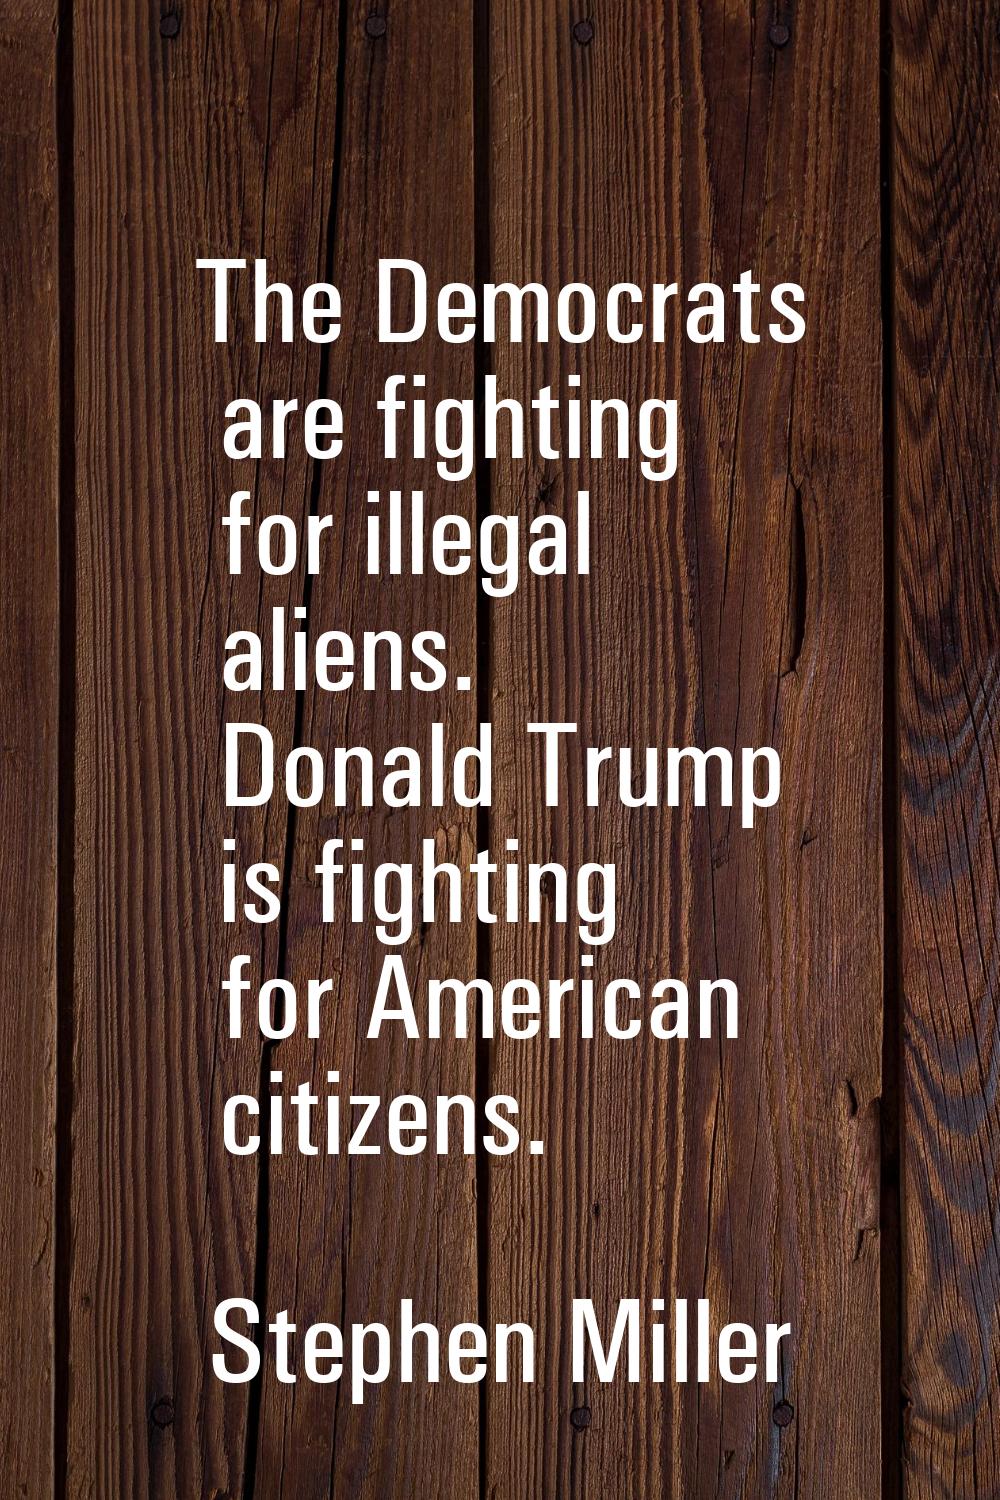 The Democrats are fighting for illegal aliens. Donald Trump is fighting for American citizens.